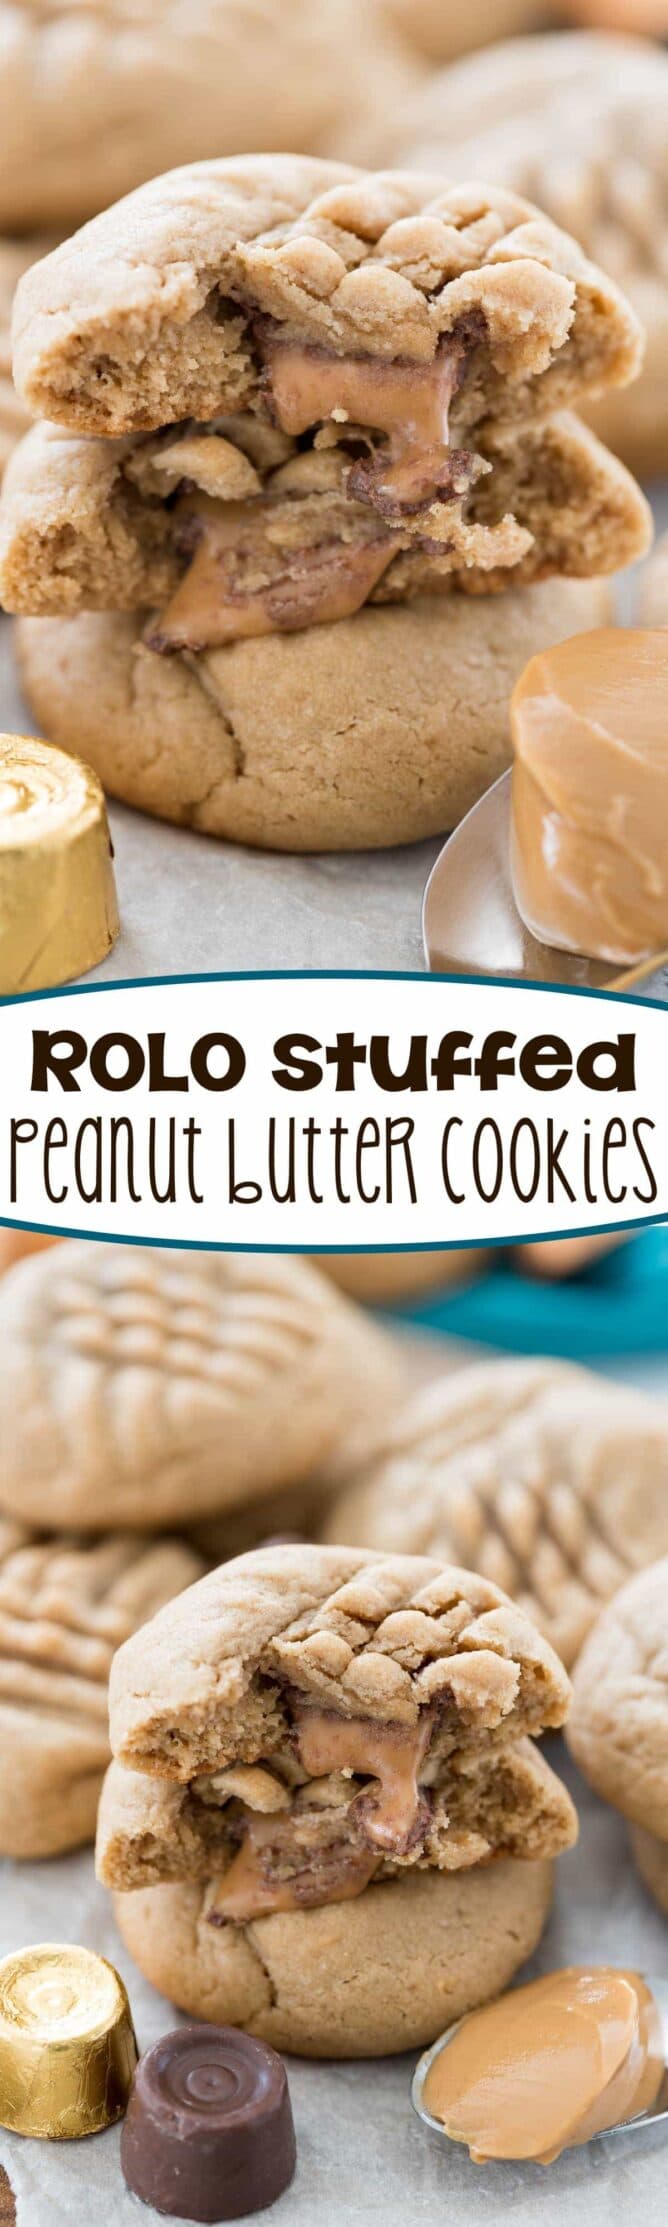 Rolo Stuffed Peanut Butter Cookies in a stack with caramel oozing out collage photo